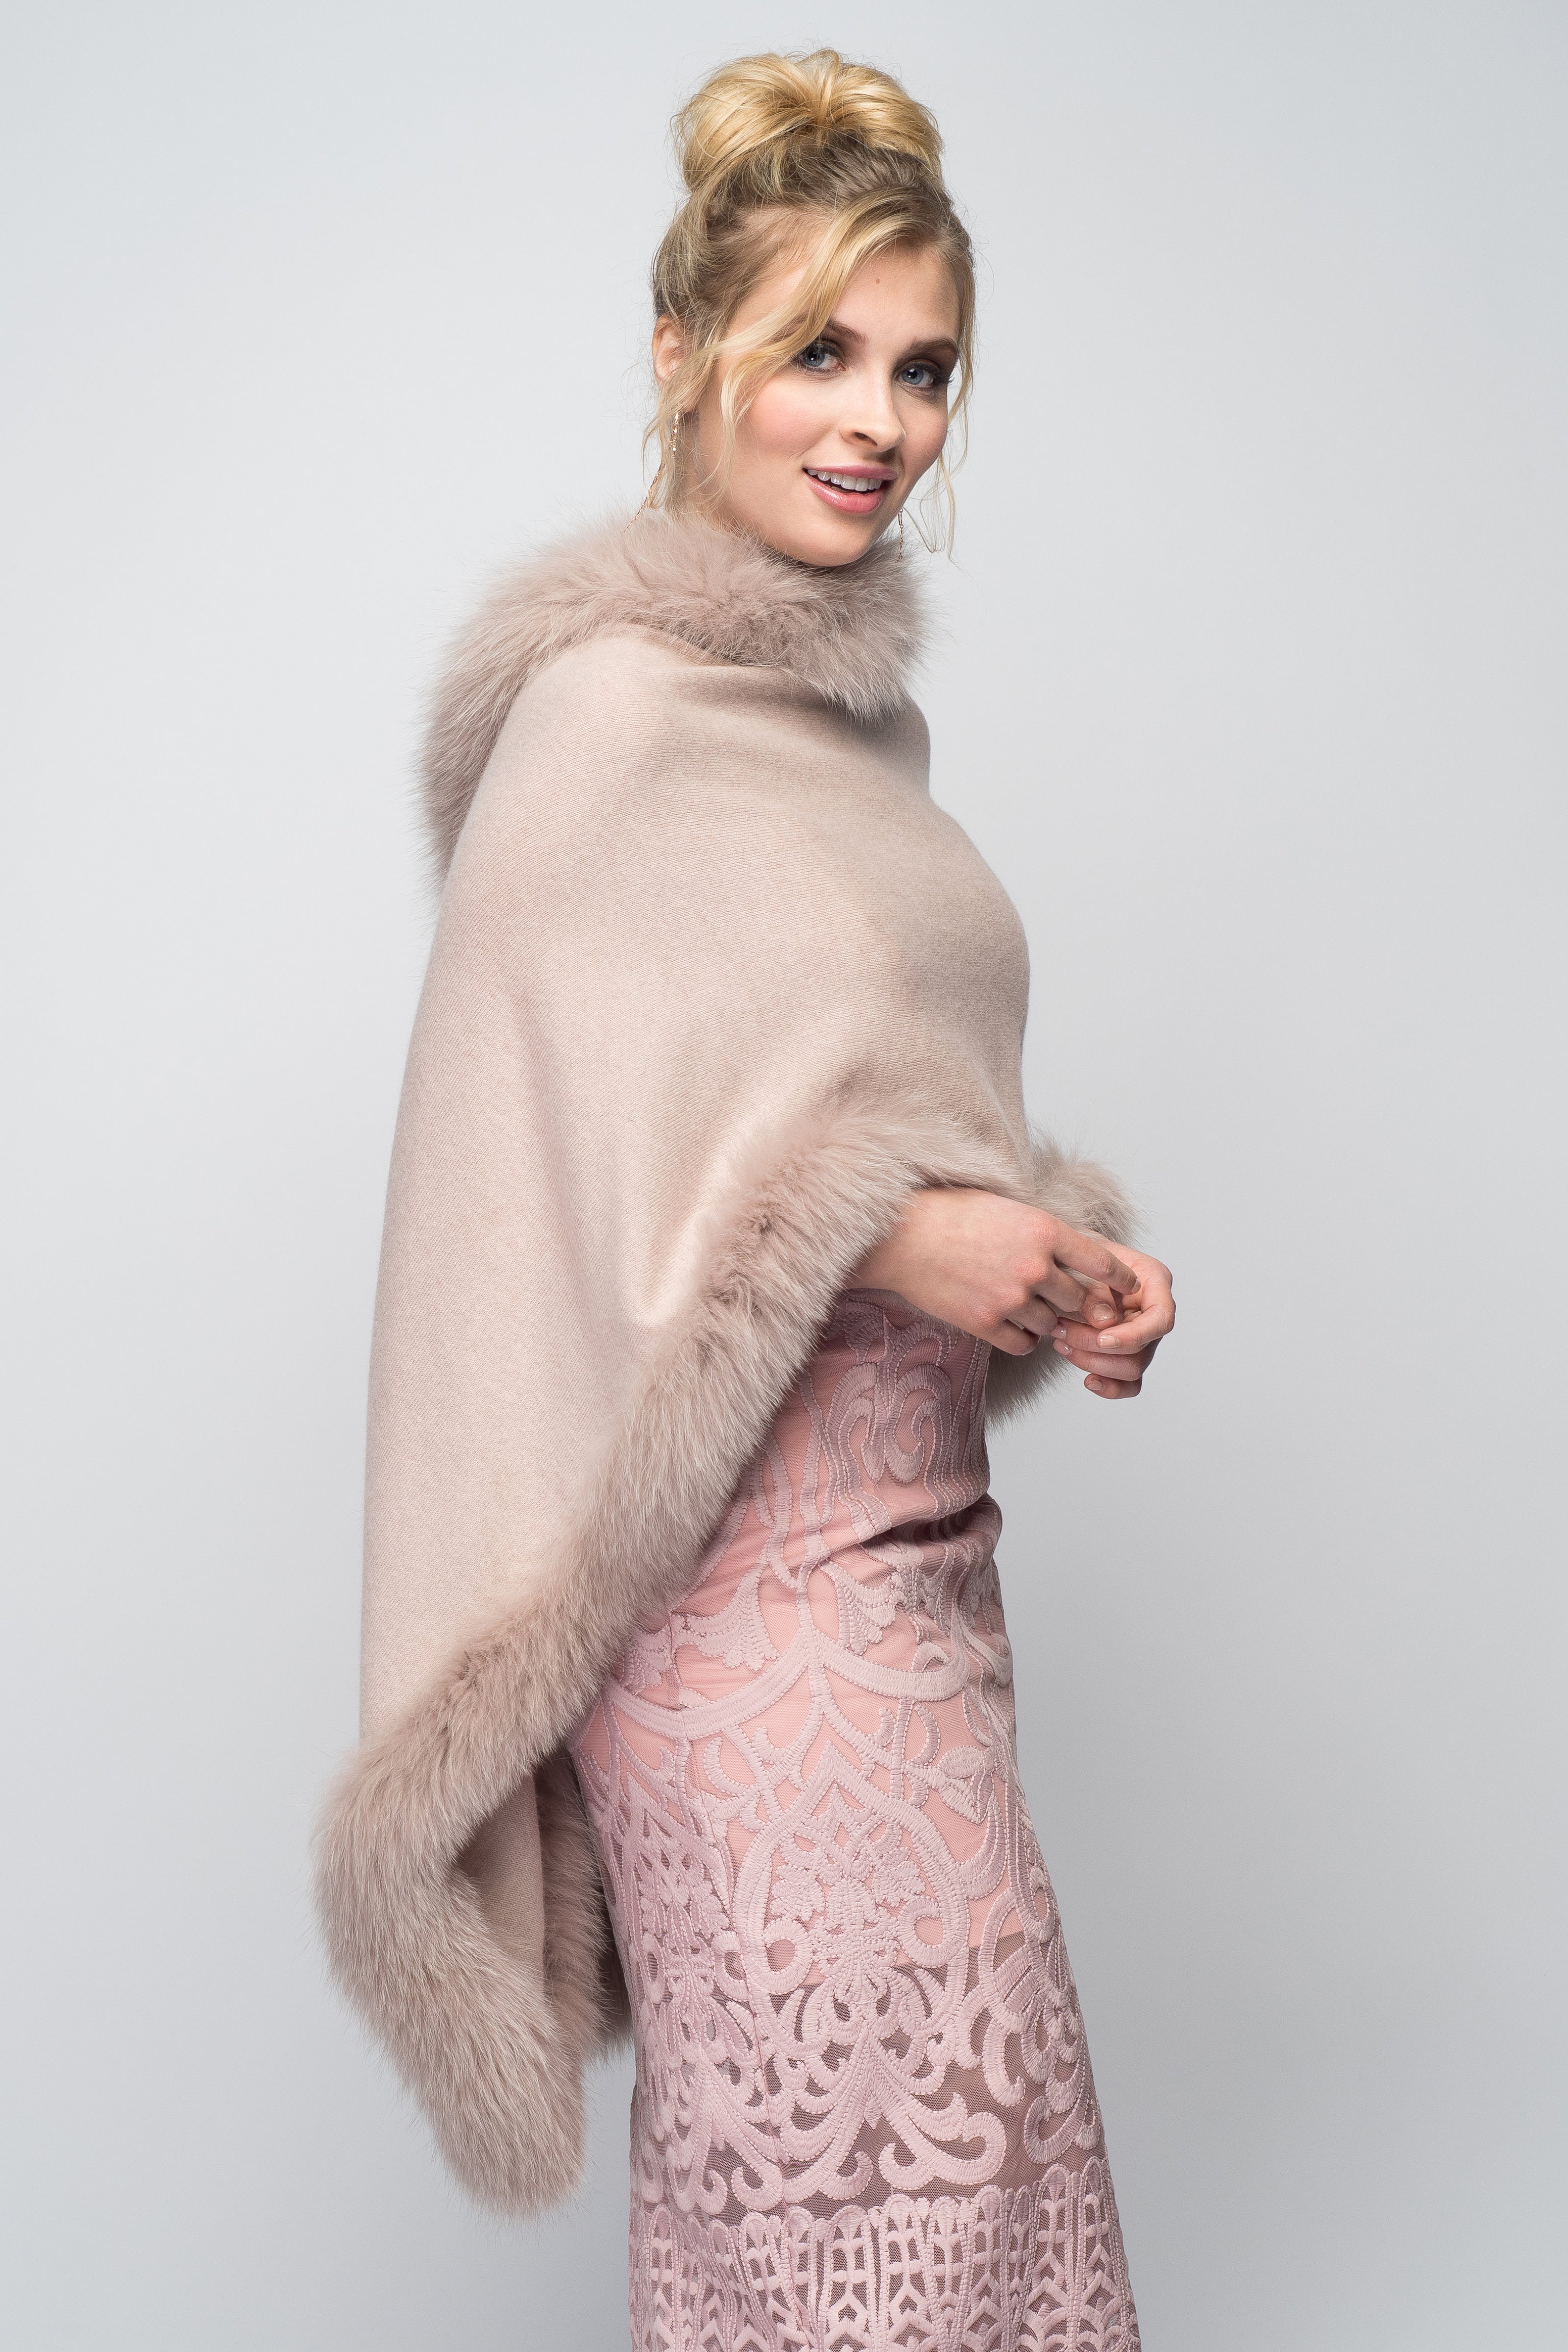 Cashmere Stole with Full Fox Fur Trim in Blush